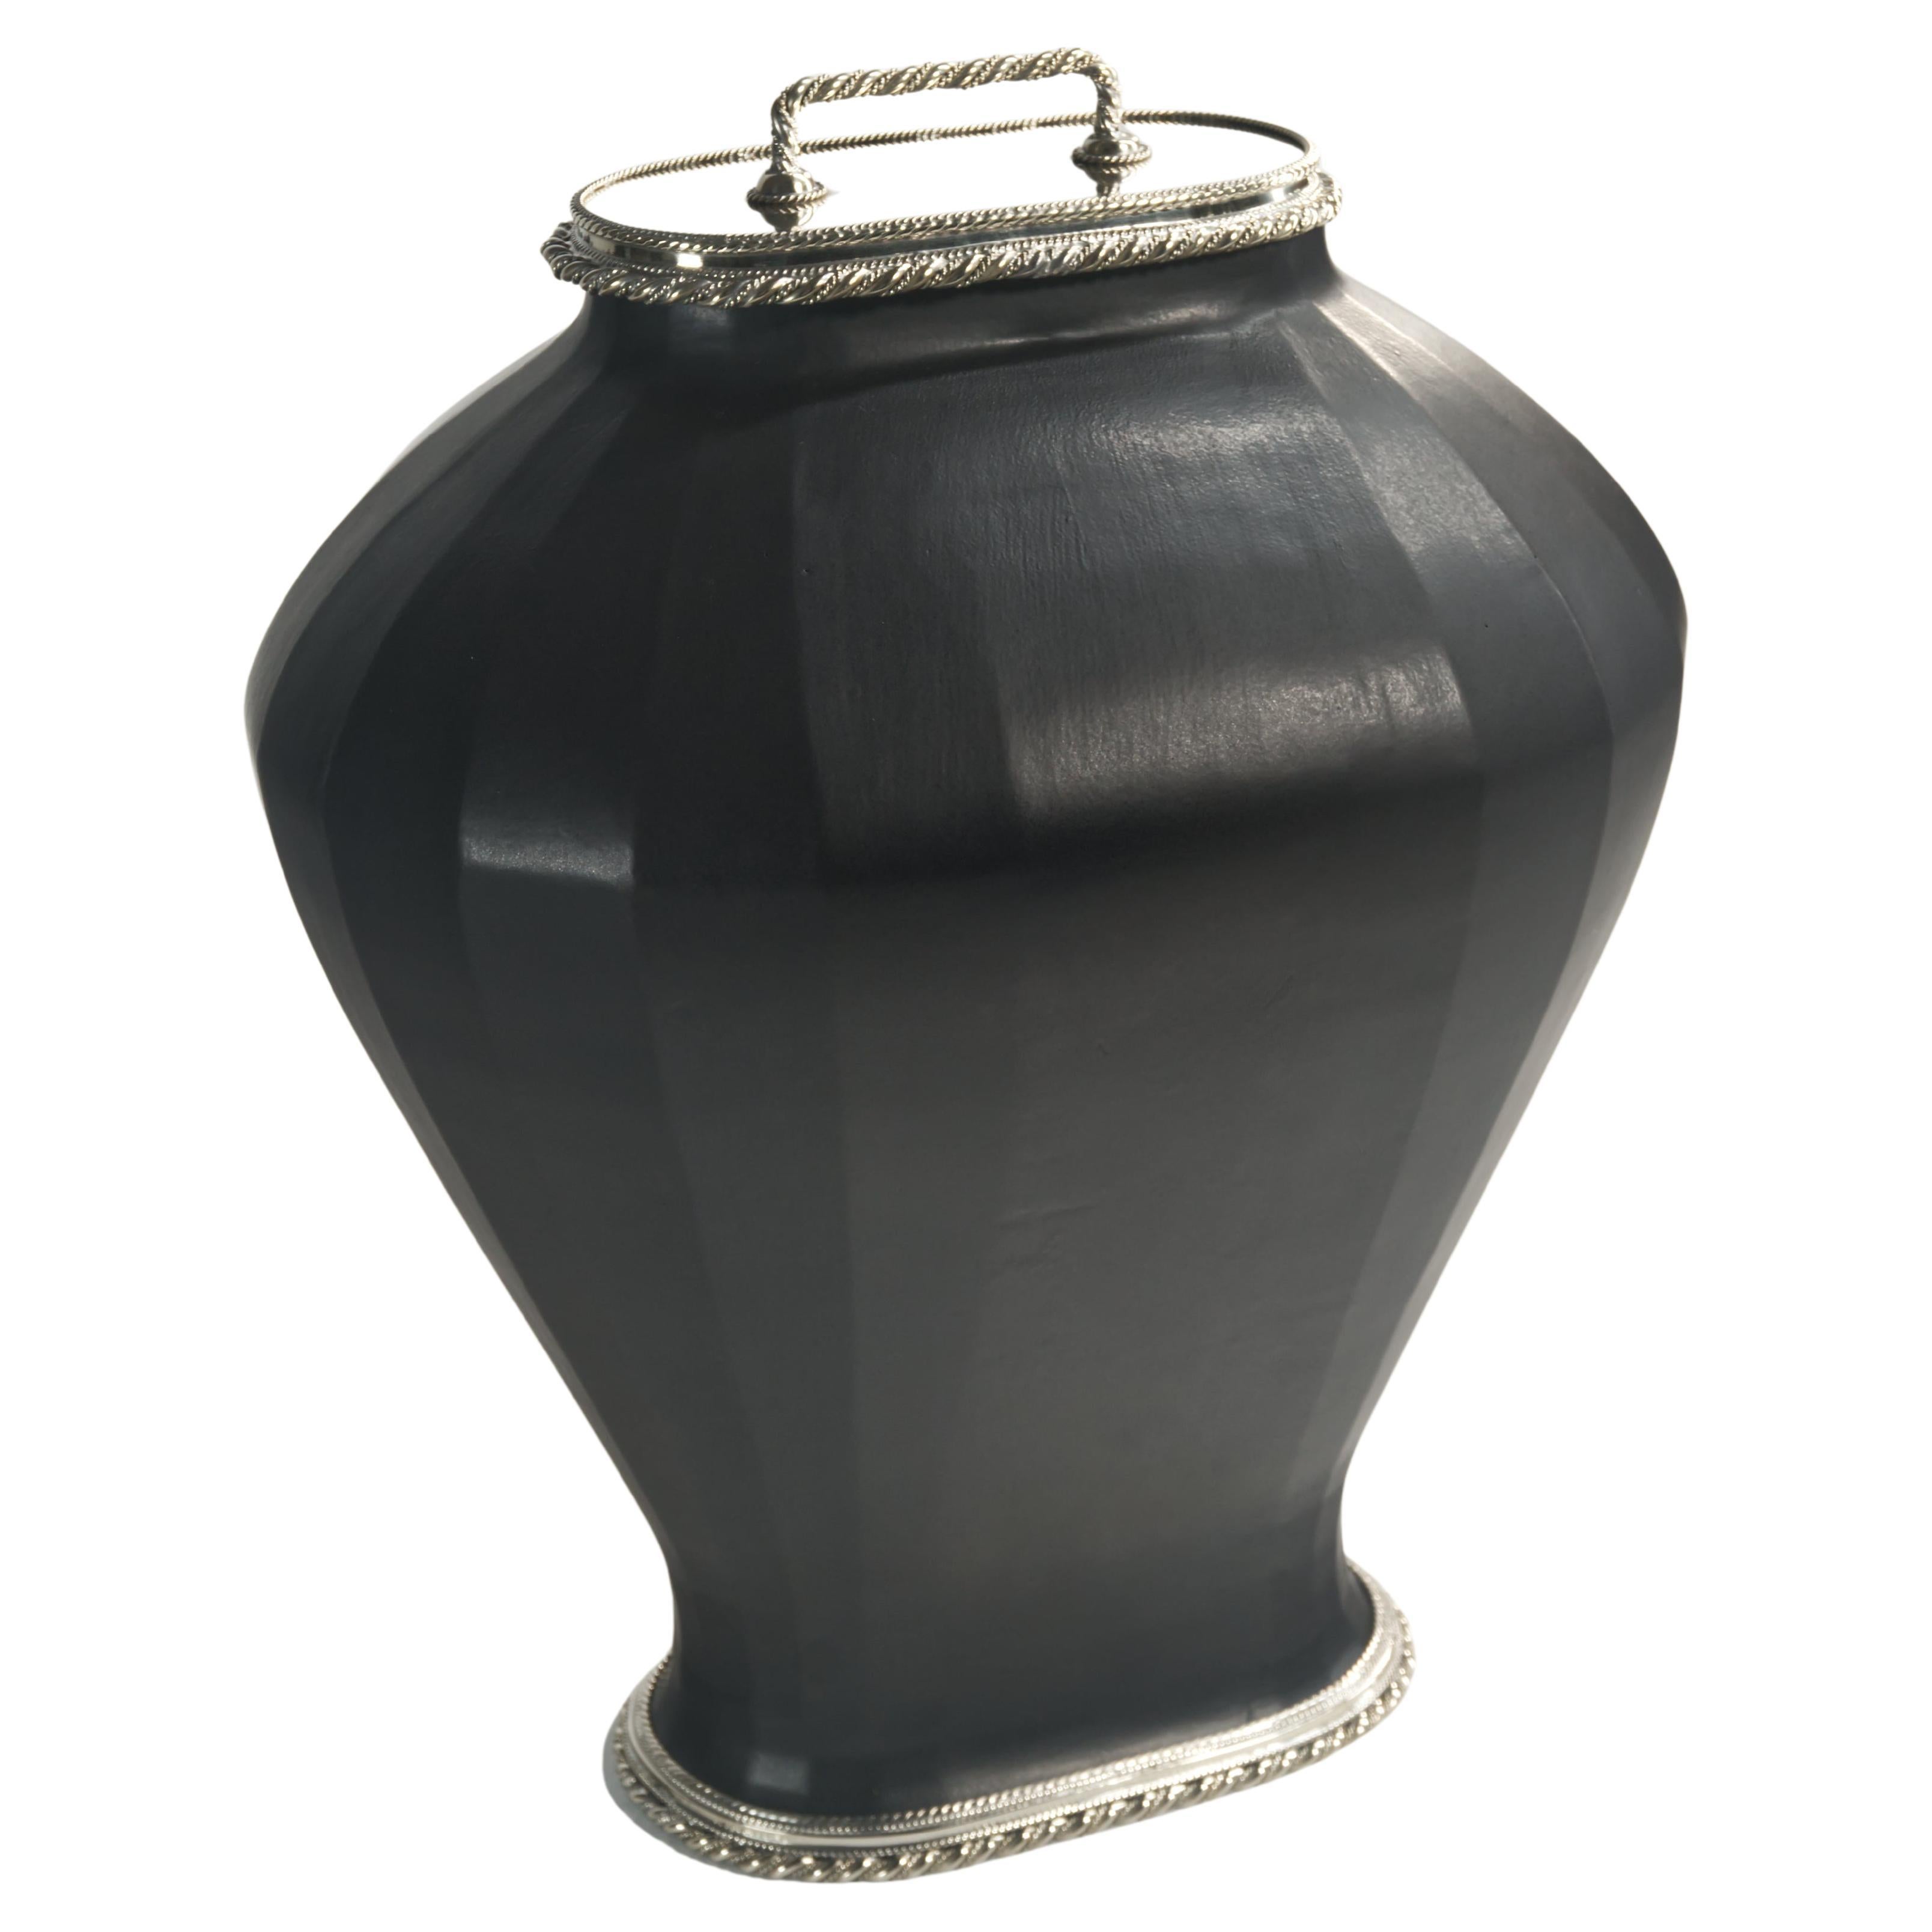 Black Ceramic Base by Estudio Guerrero Made with Glazed Ceramic and White Metal For Sale